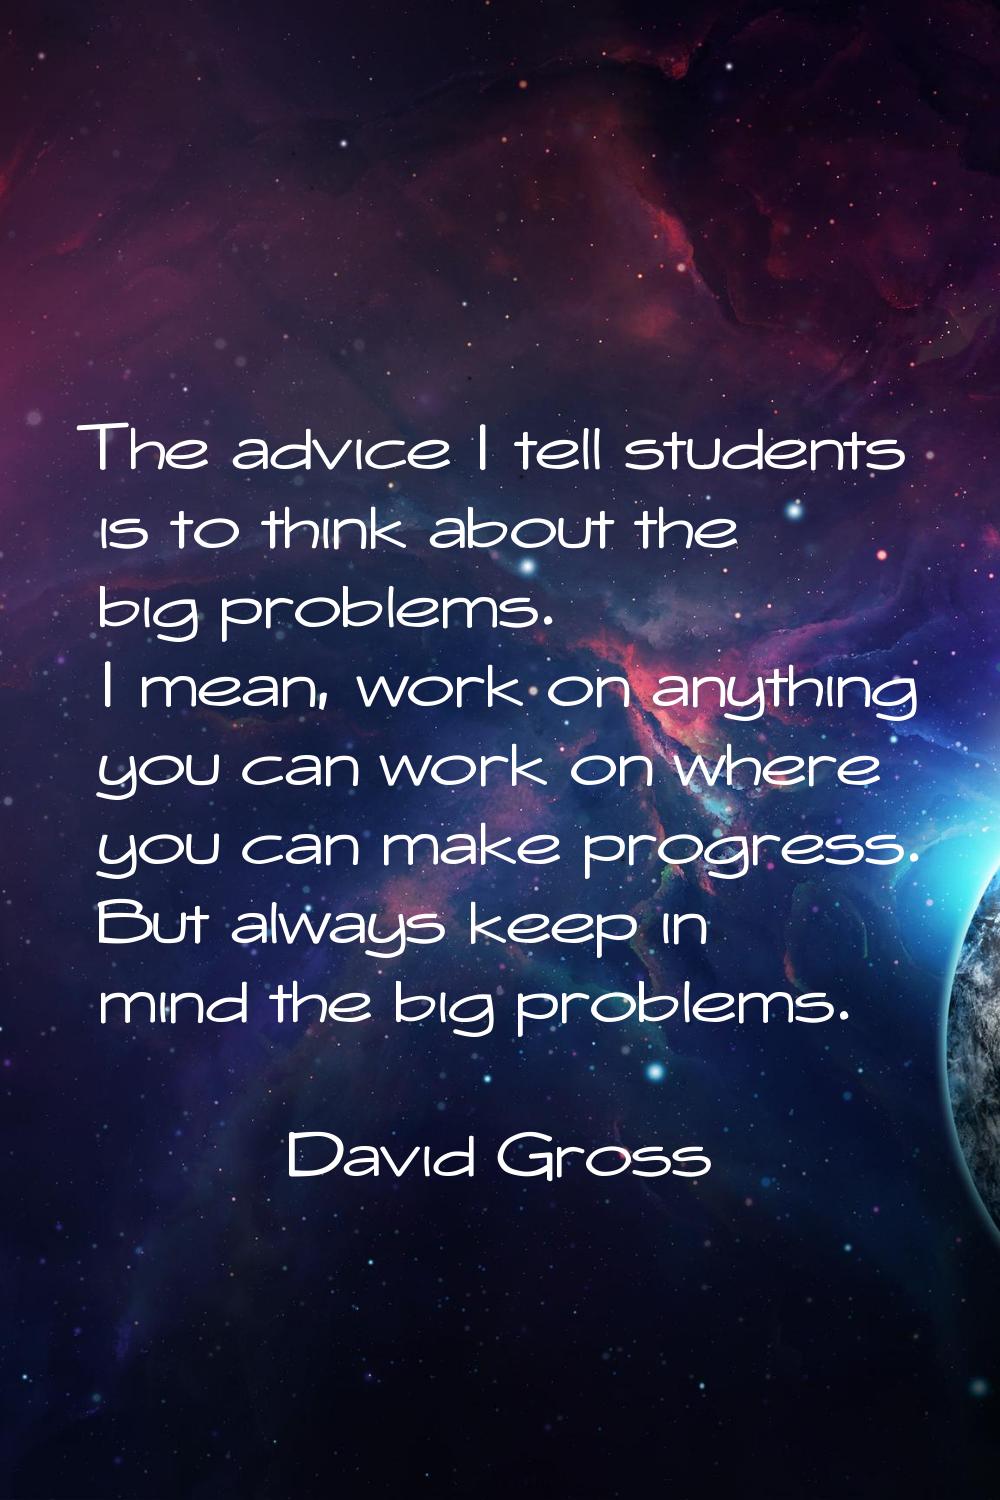 The advice I tell students is to think about the big problems. I mean, work on anything you can wor